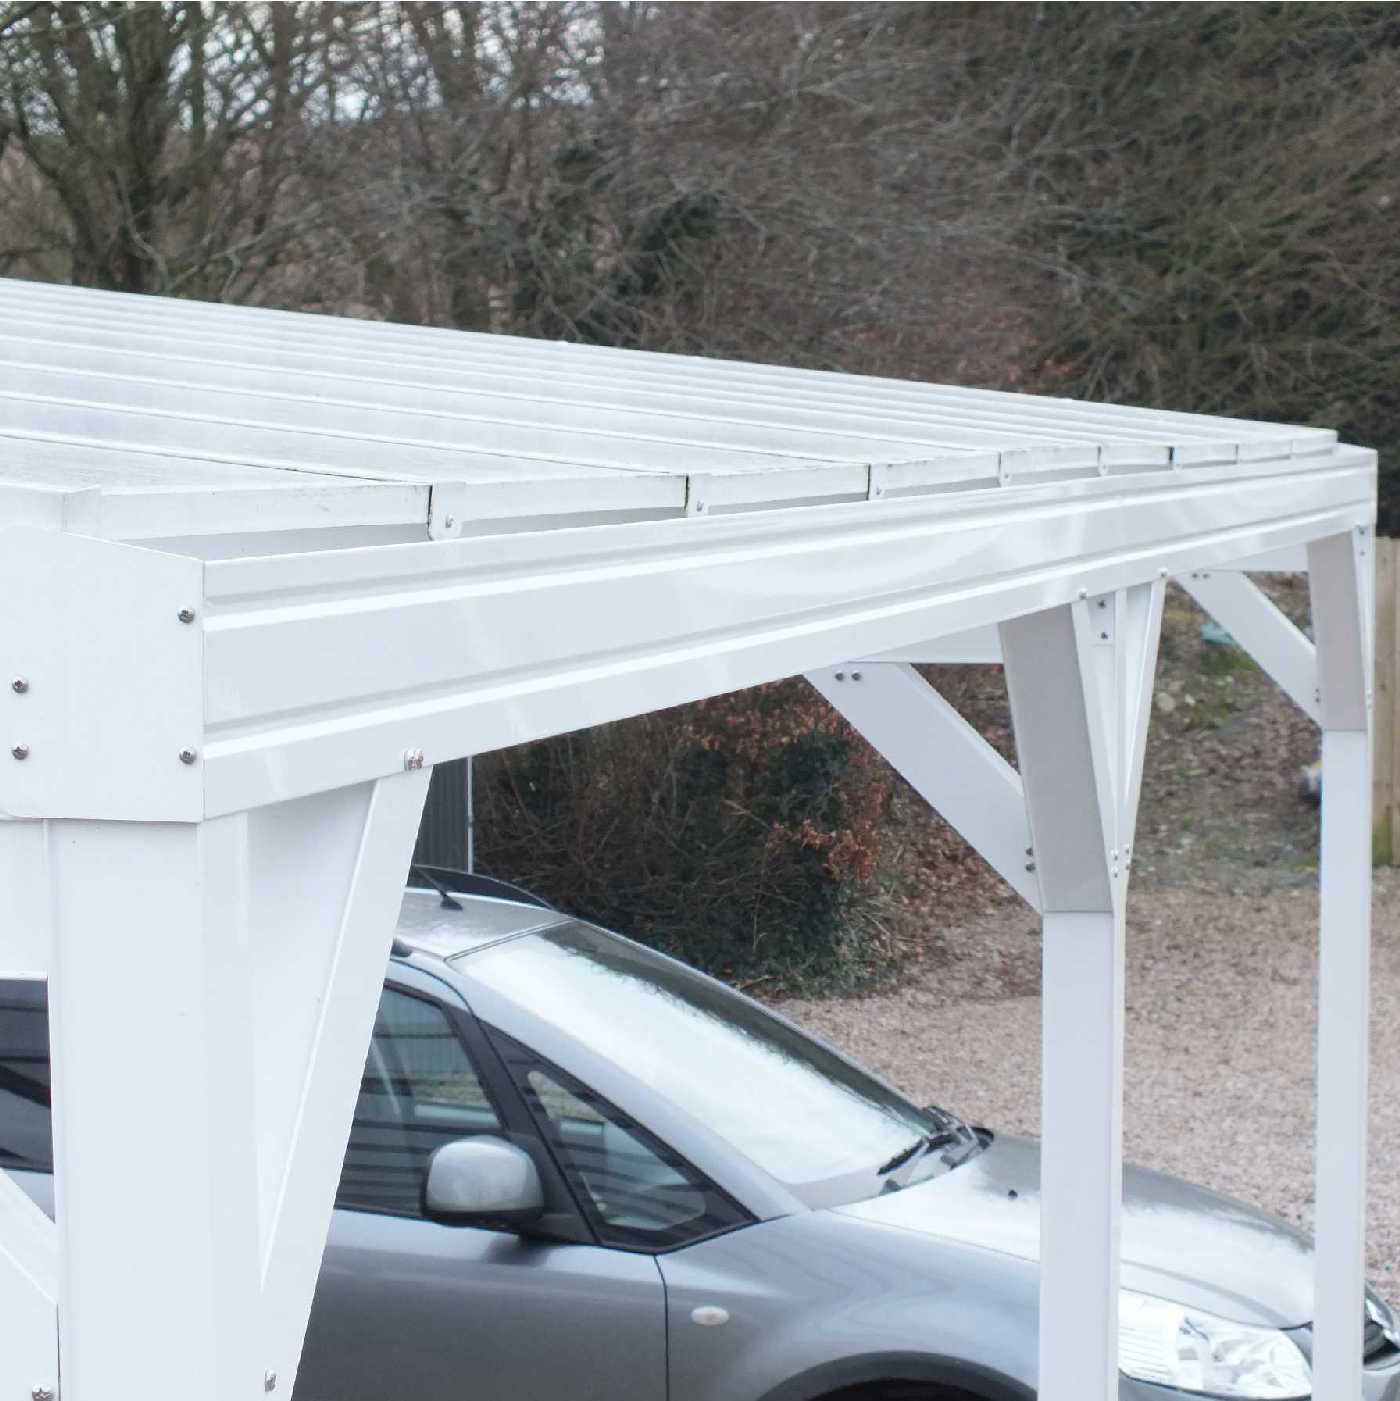 Omega Smart Free-Standing, White MonoPitch Roof Canopy with 16mm Polycarbonate Glazing - 7.4m (W) x 2.0m (P), (8) Supporting Posts from Omega Build